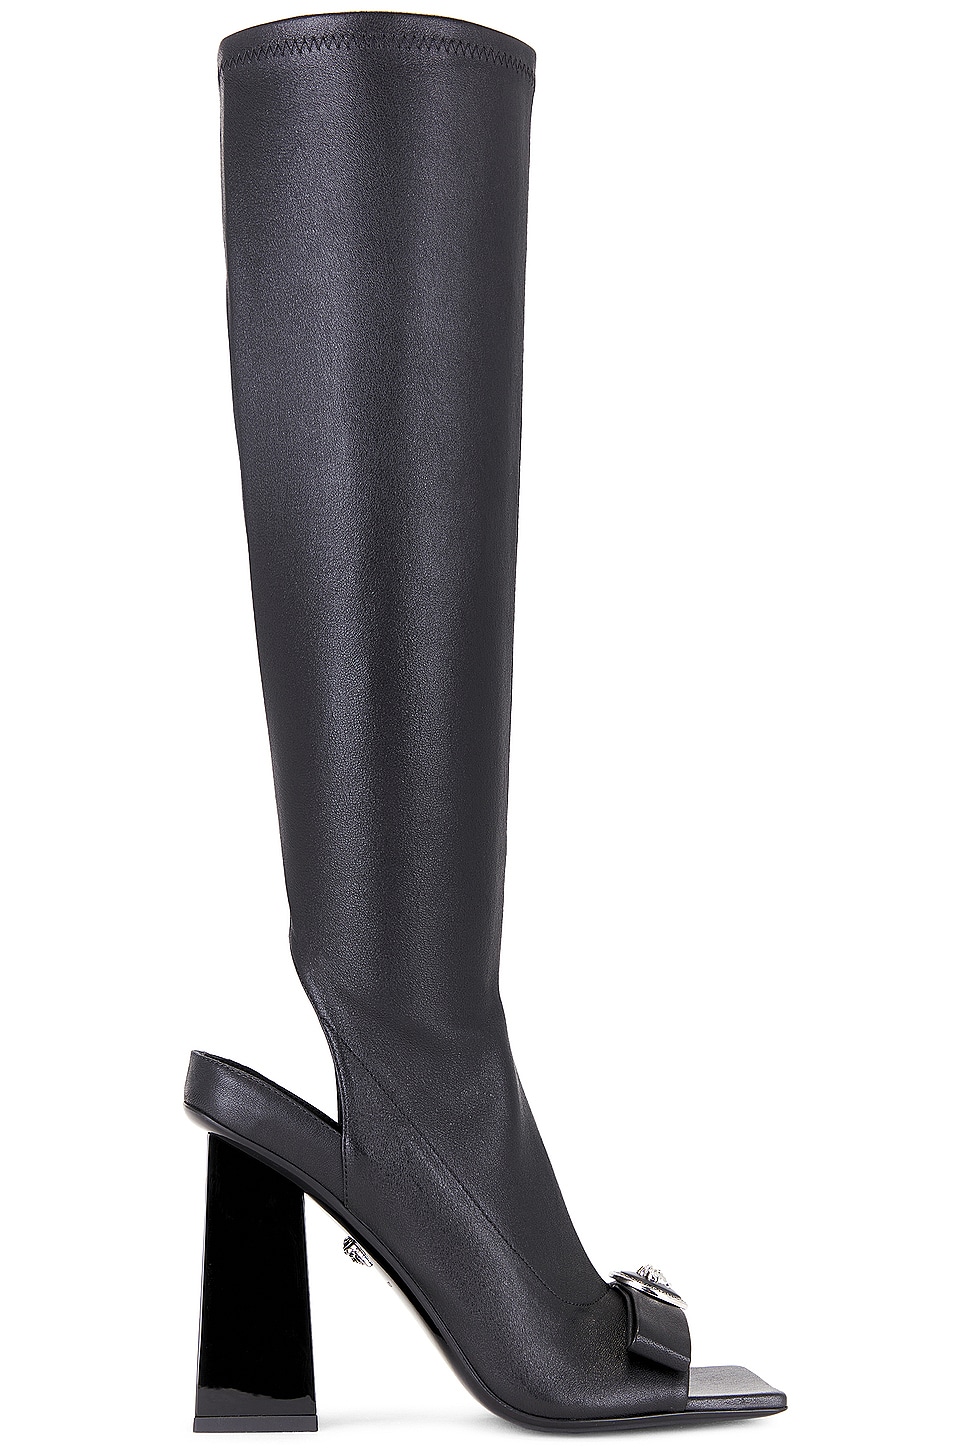 Image 1 of VERSACE Heeled Open-toe Riding Boot in Black